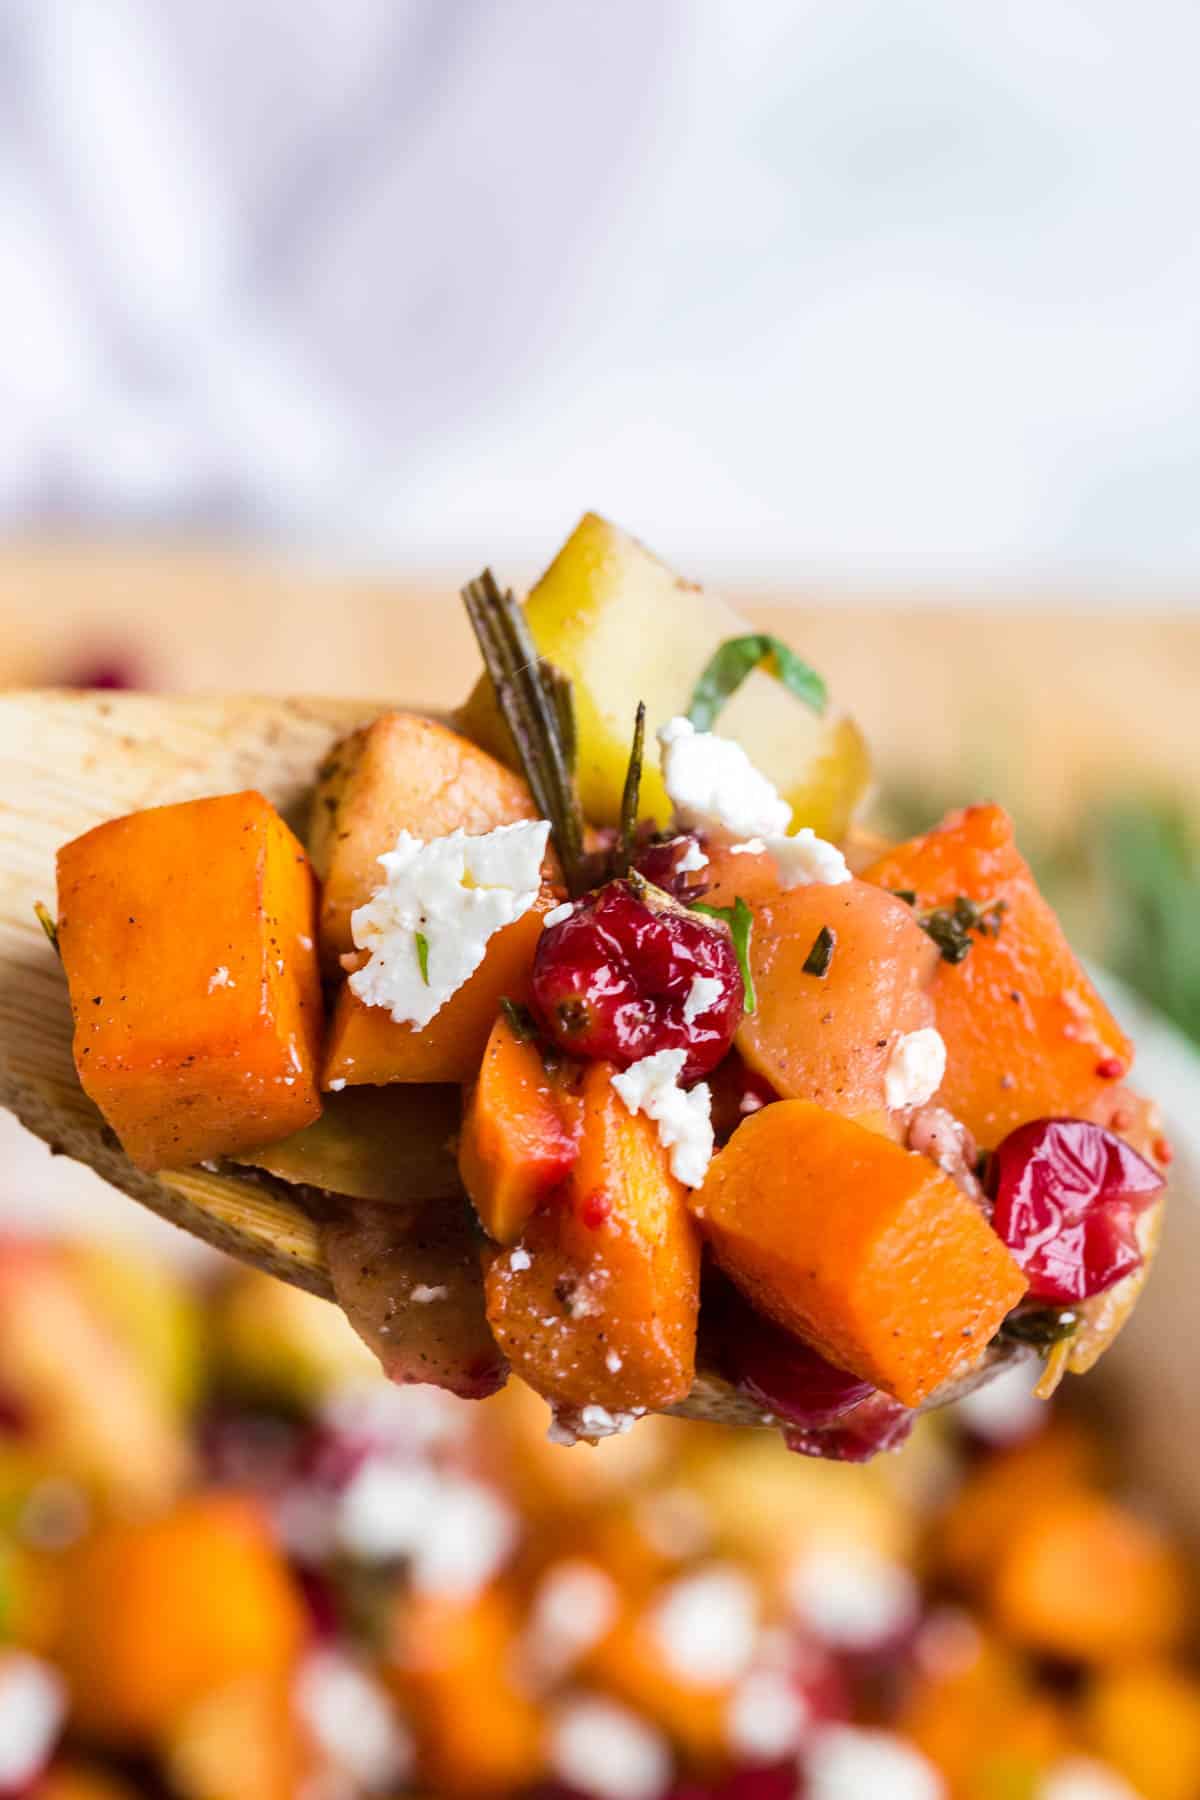 a wooden spoon with burst cranberries, feta cheese, and baked squash and apples